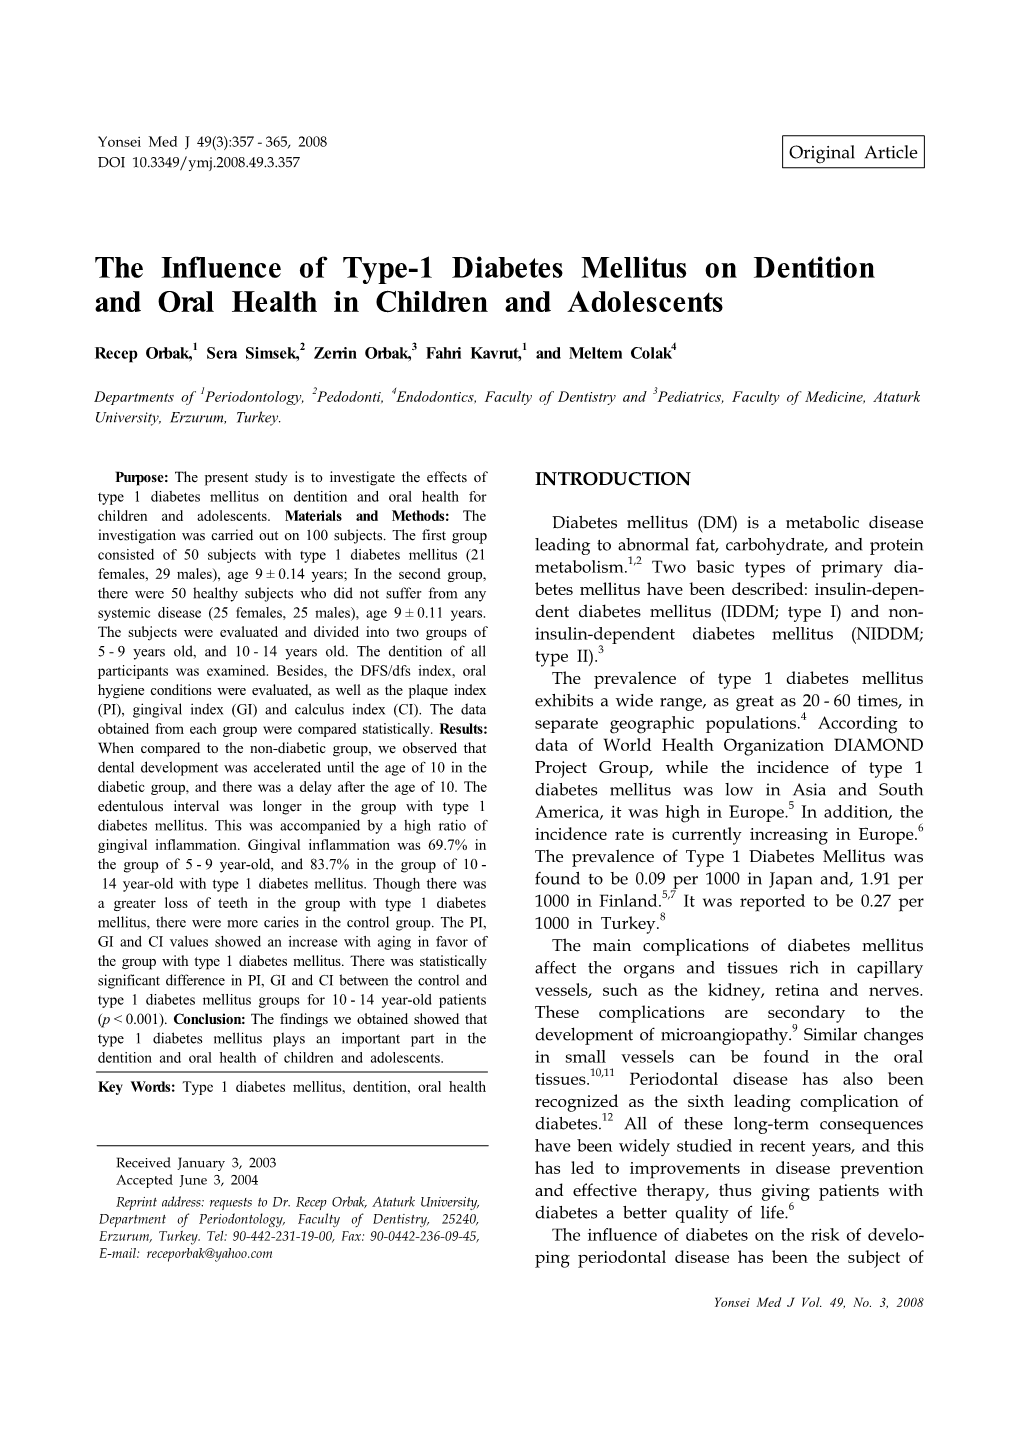 The Influence of Type-1 Diabetes Mellitus on Dentition and Oral Health in Children and Adolescents